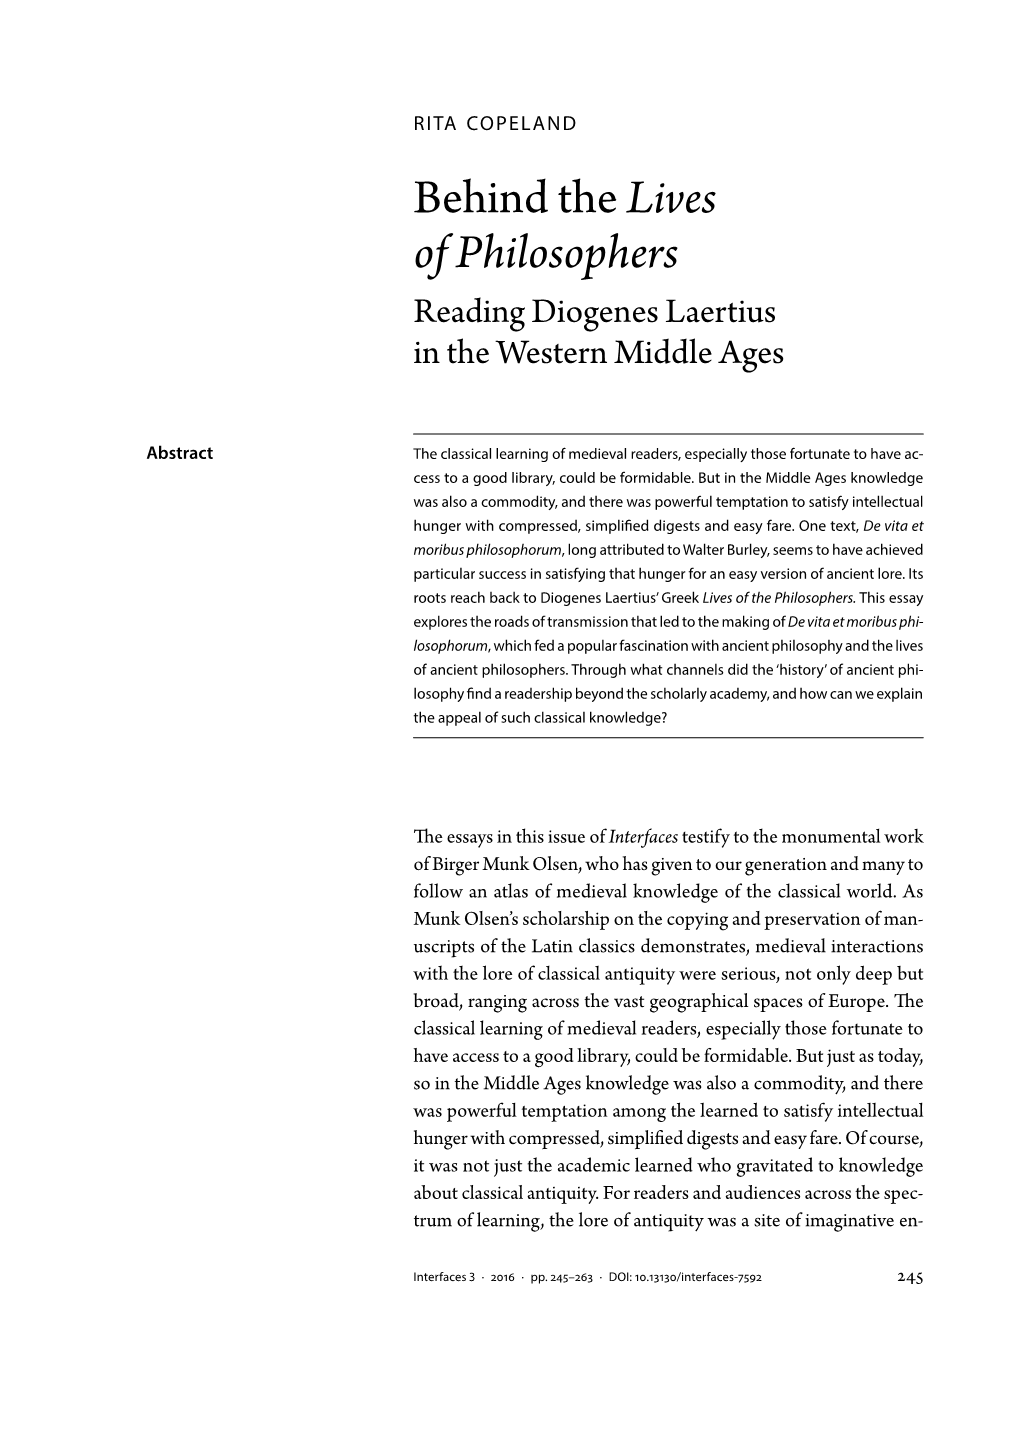 Behind the Lives of Philosophers Reading Diogenes Laertius in the Western Middle Ages